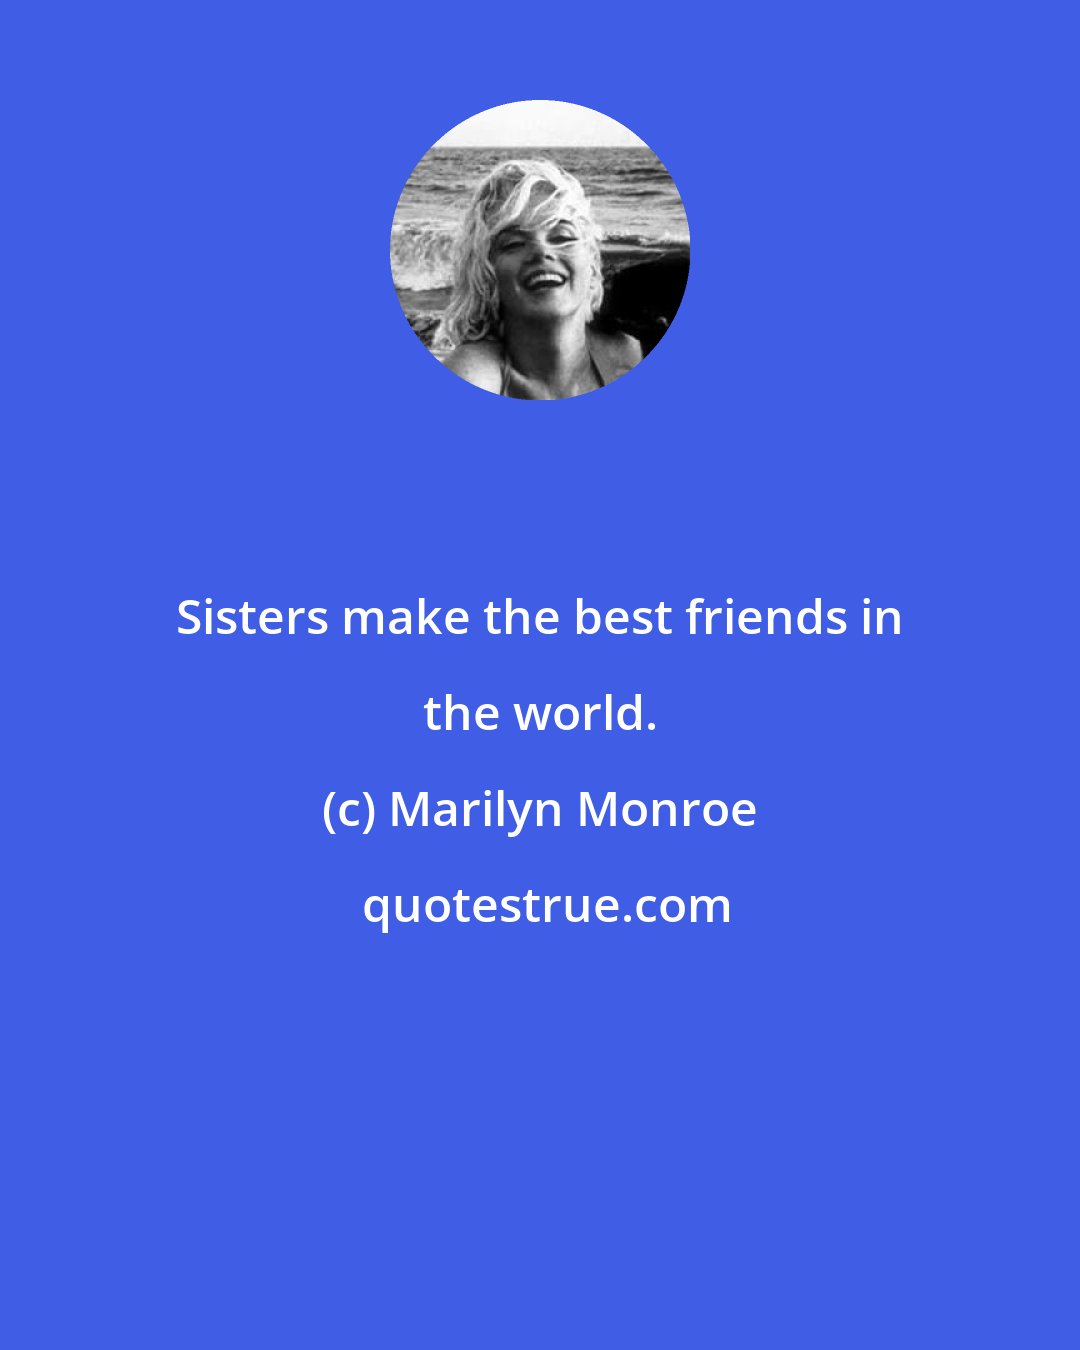 Marilyn Monroe: Sisters make the best friends in the world.